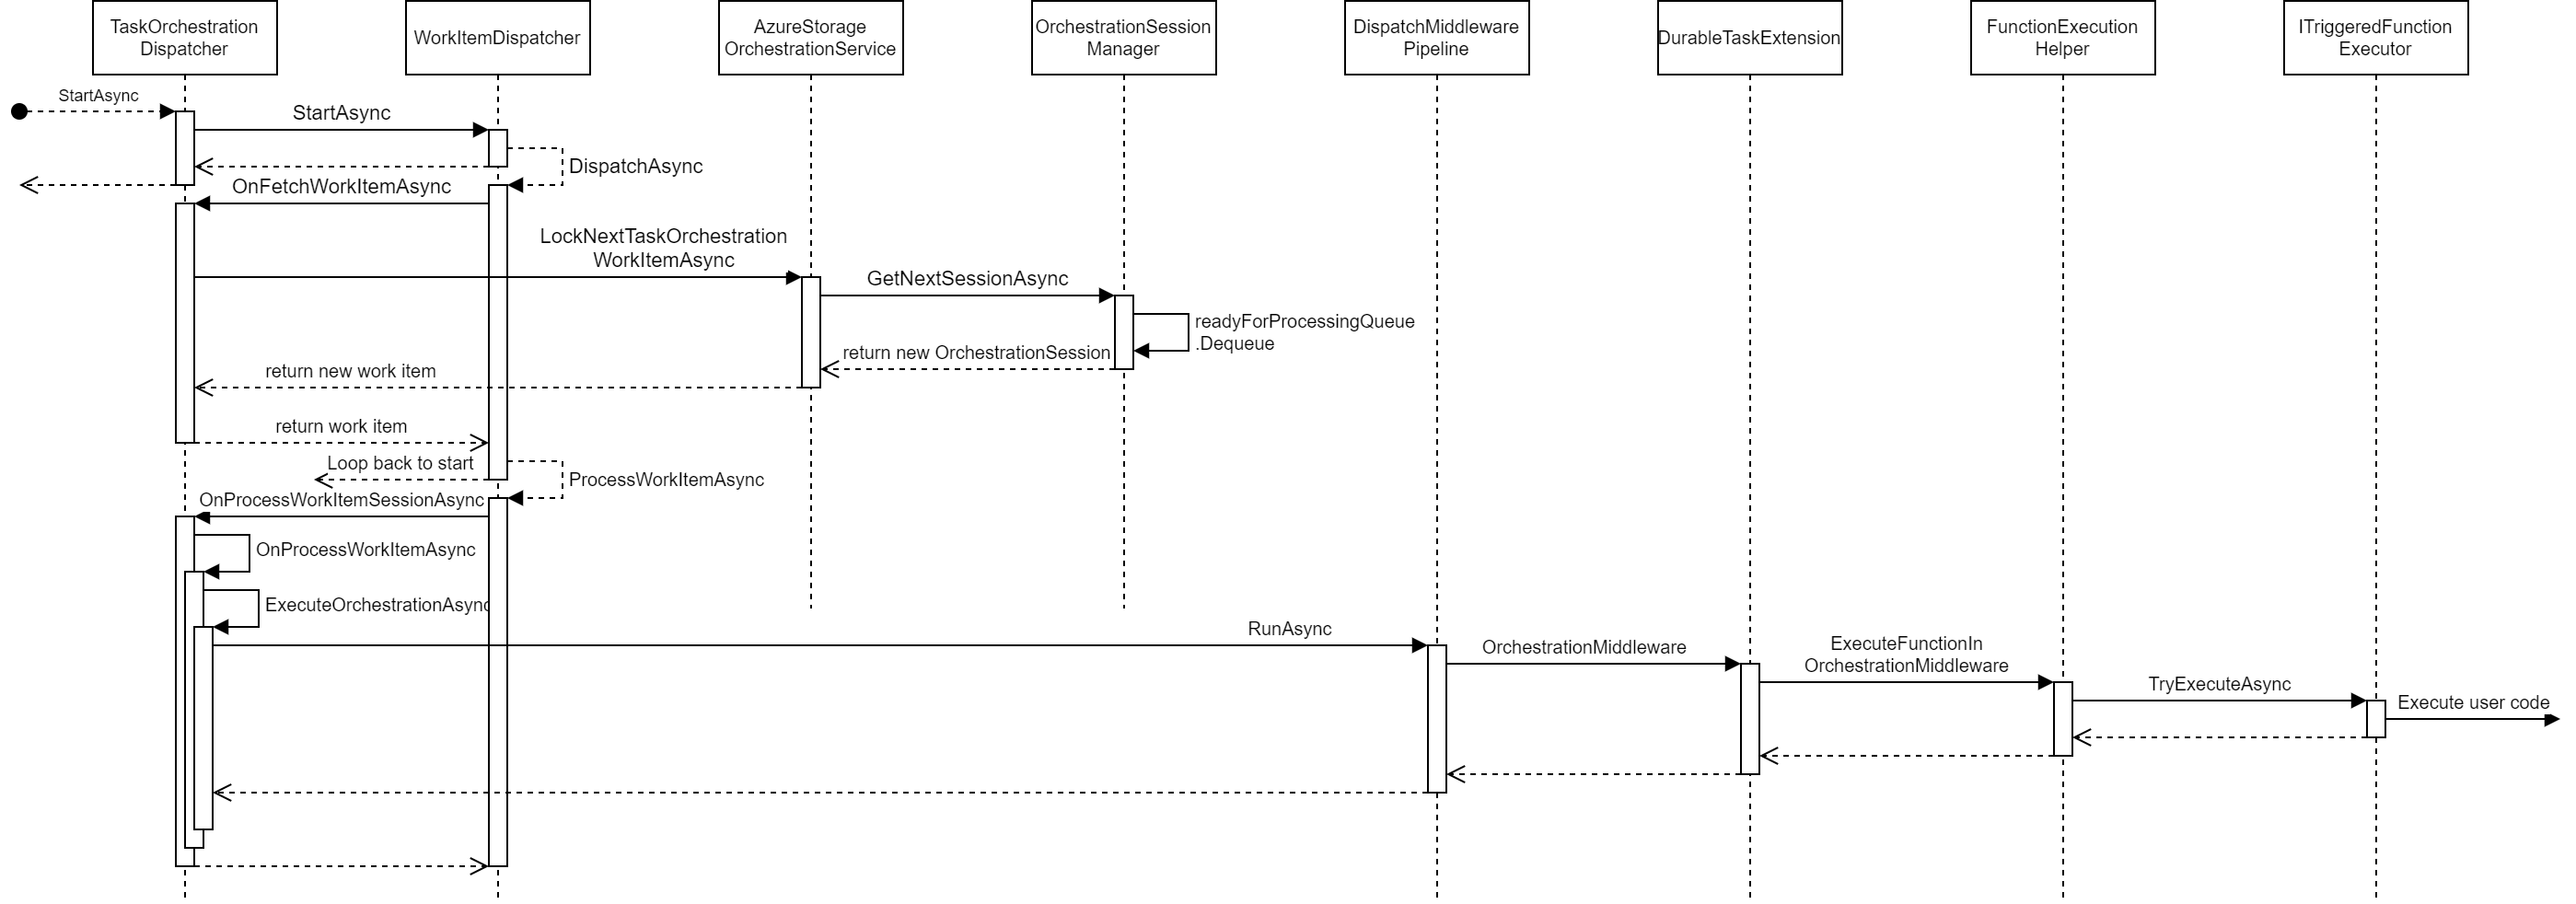 Orchestrator Function execution sequence diagram